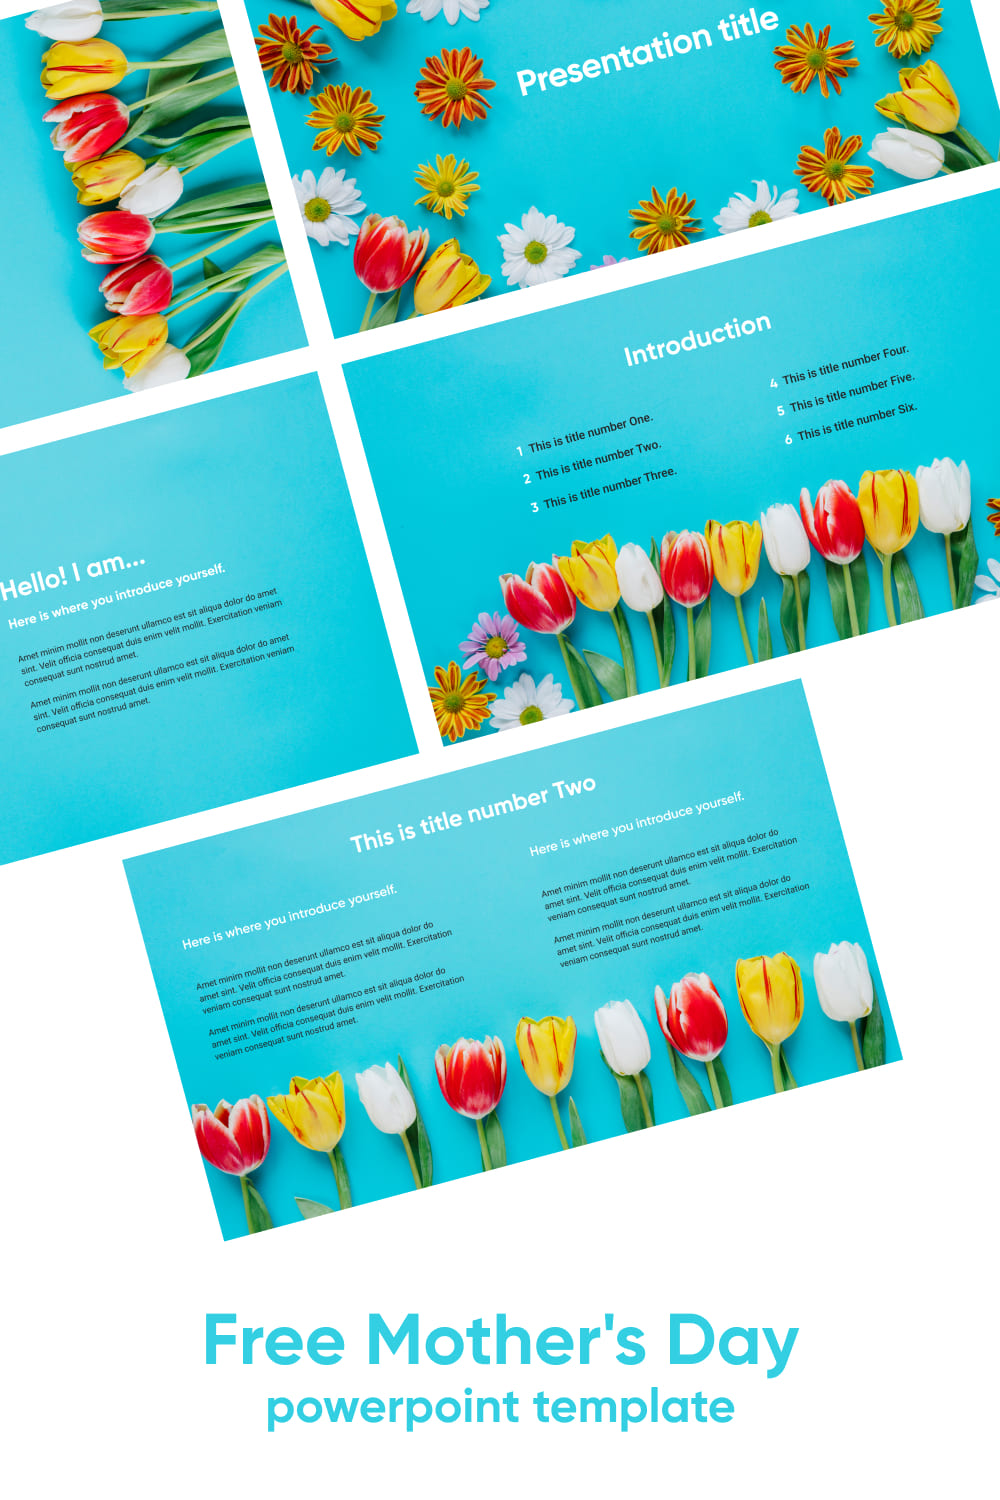 Pint Free Mothers Day Powerpoint Template.